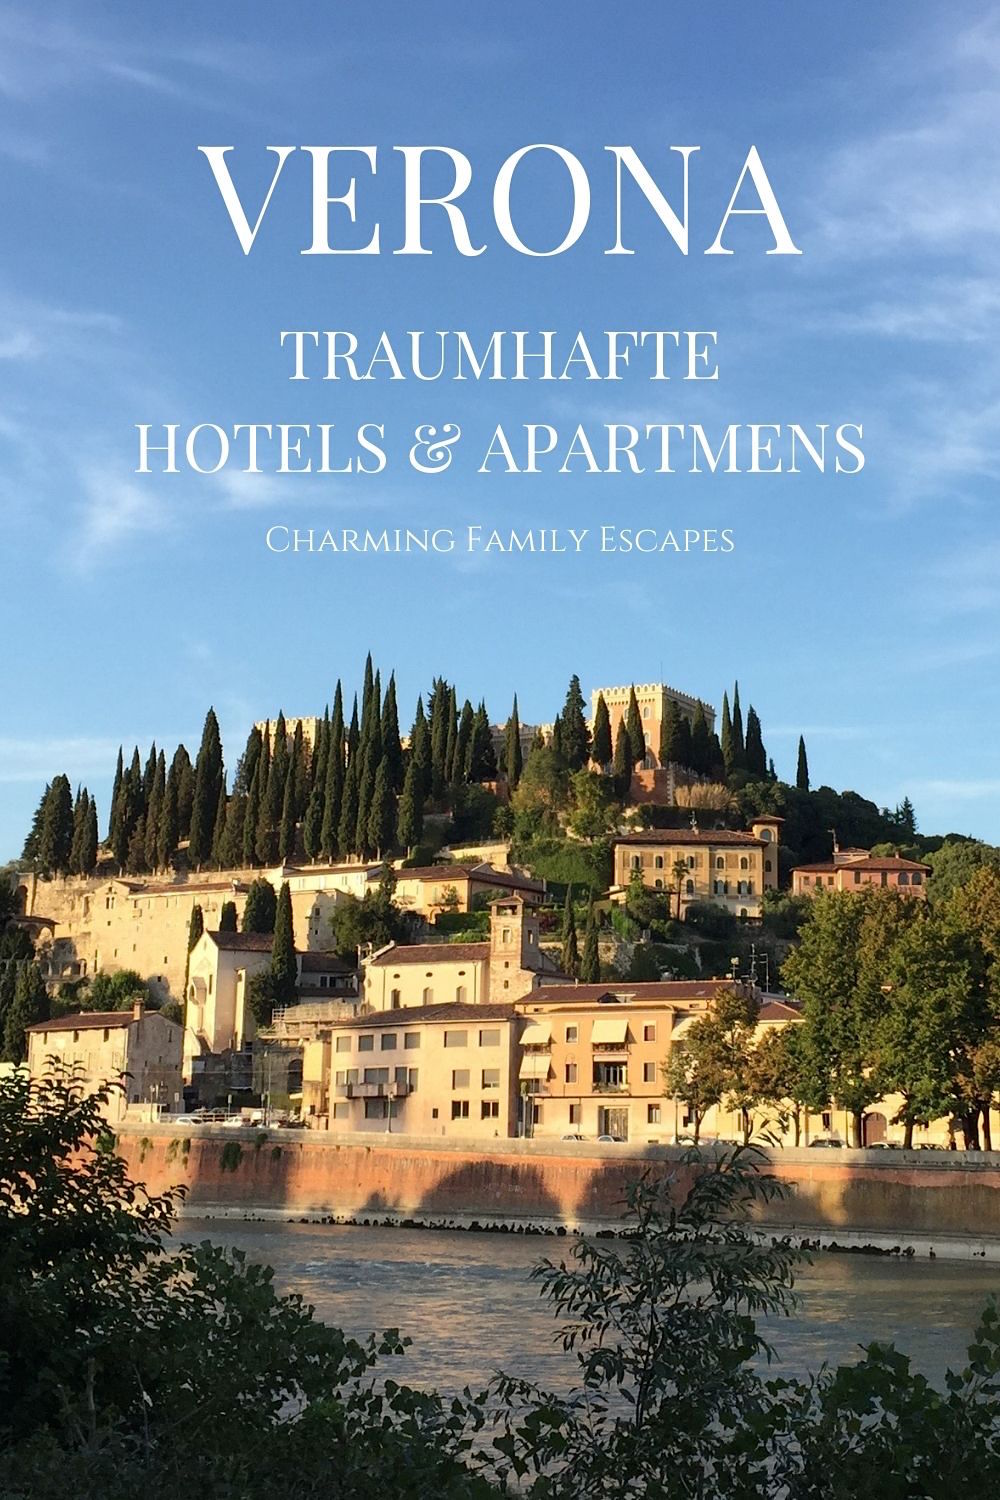 Verona - Traumhafte Hotels & Apartments